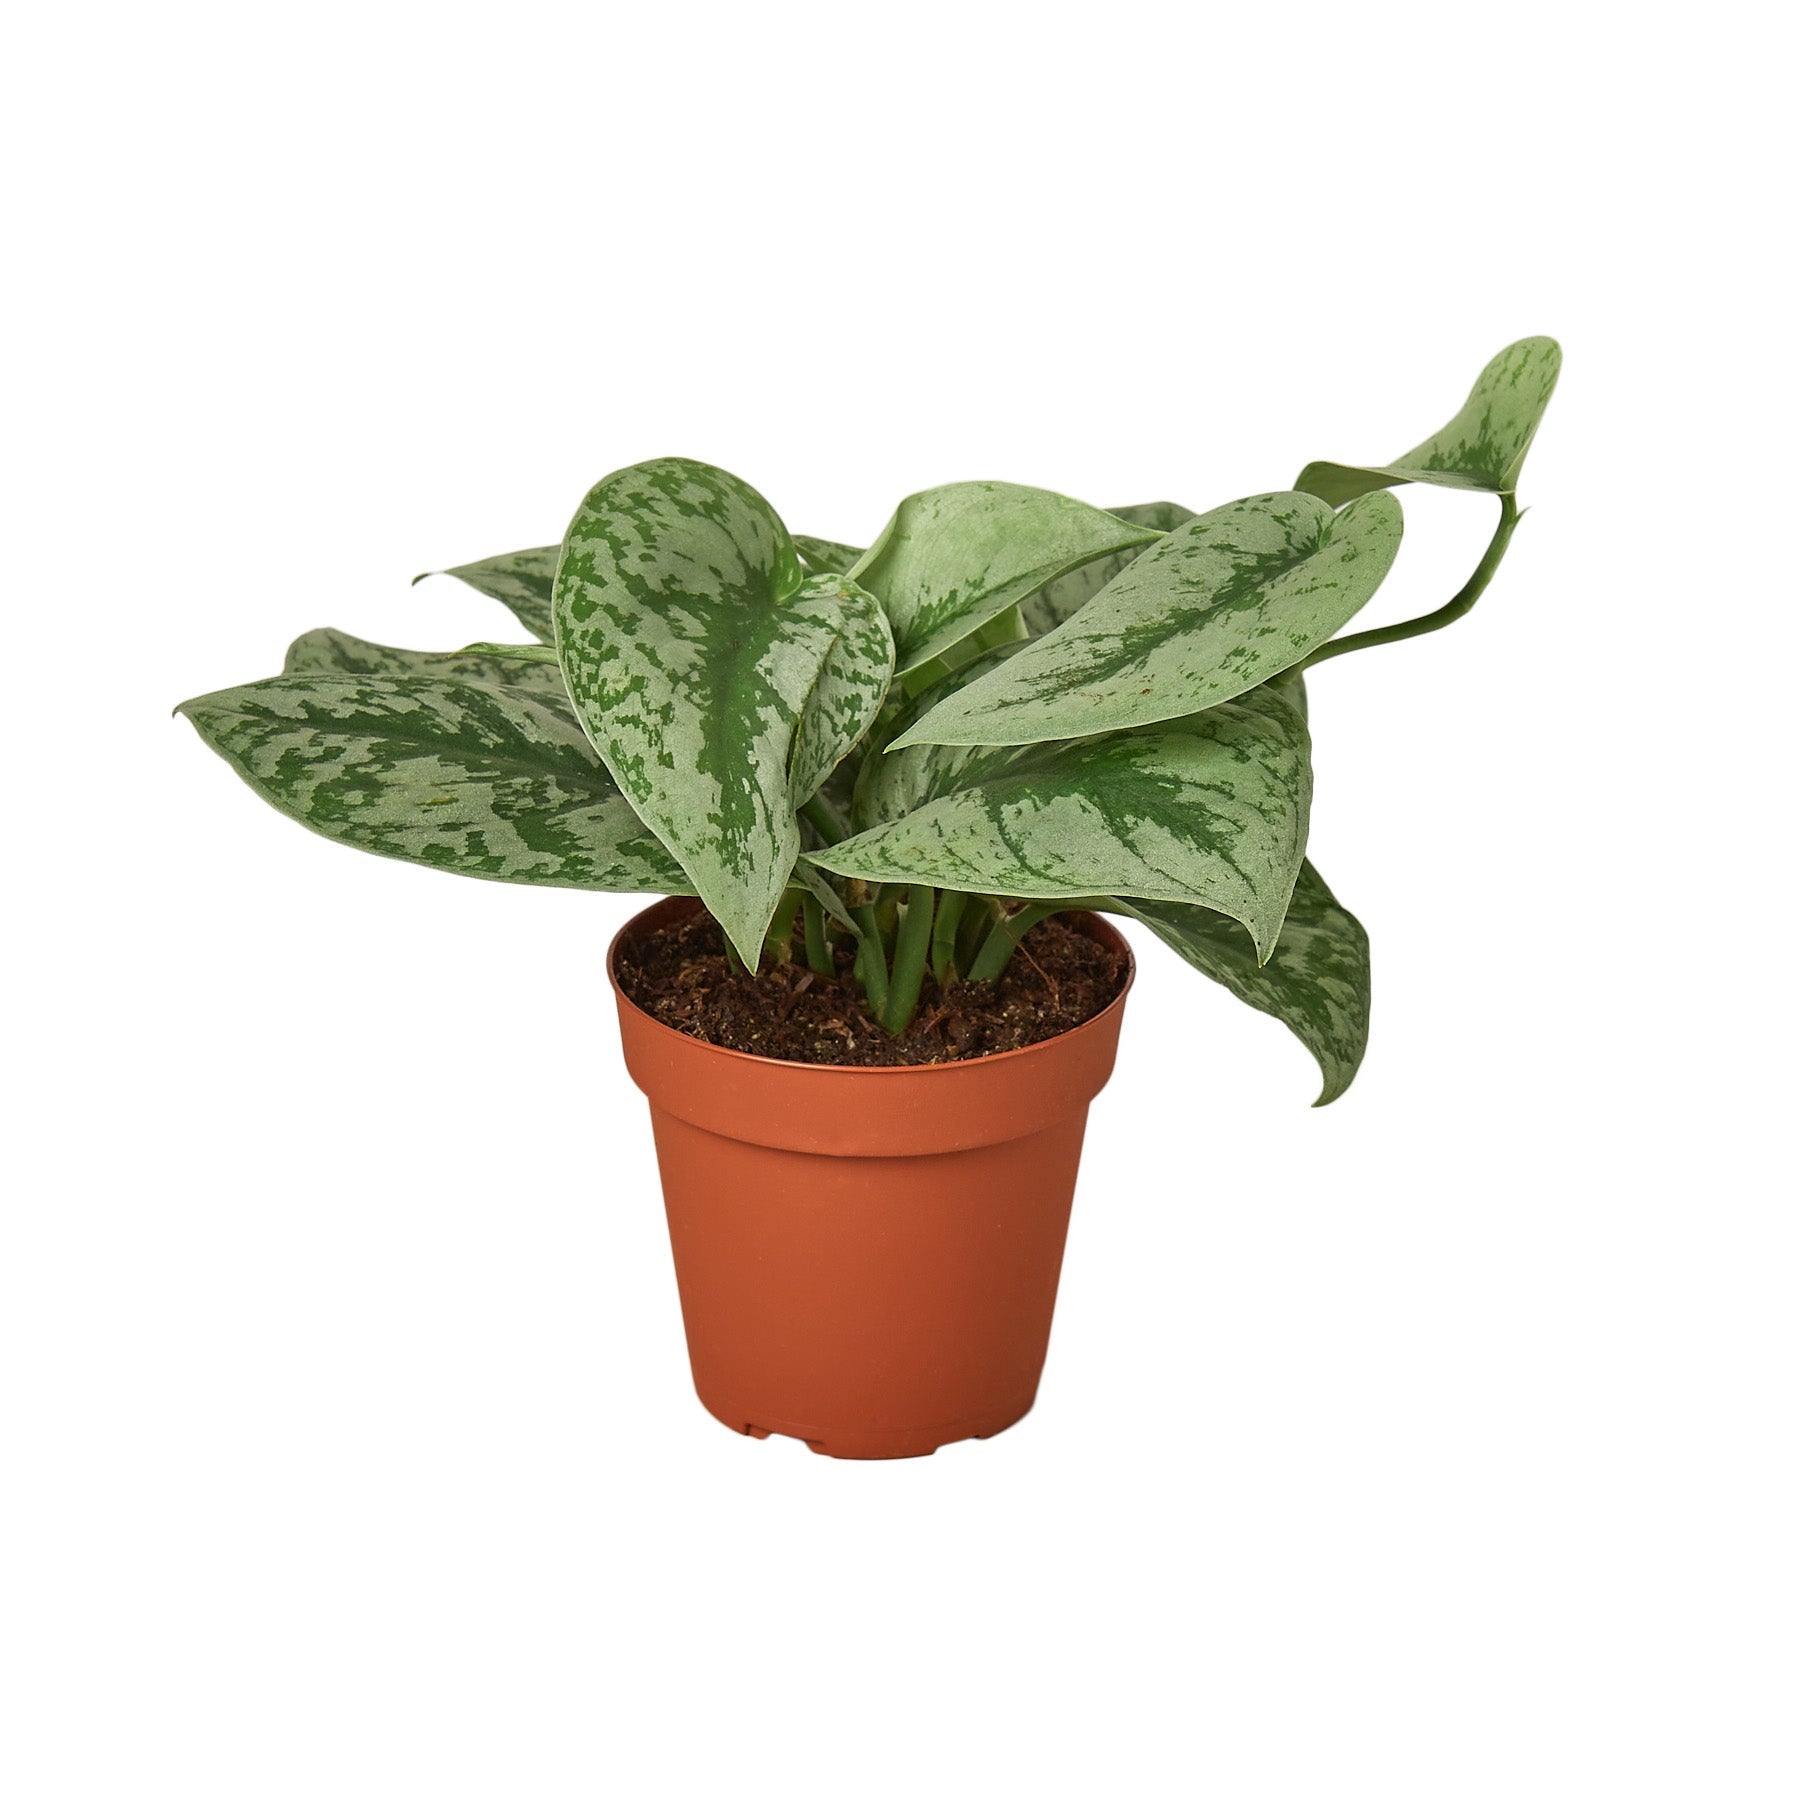 A small plant in a pot with a white background, perfect for a nearby garden center or nursery.